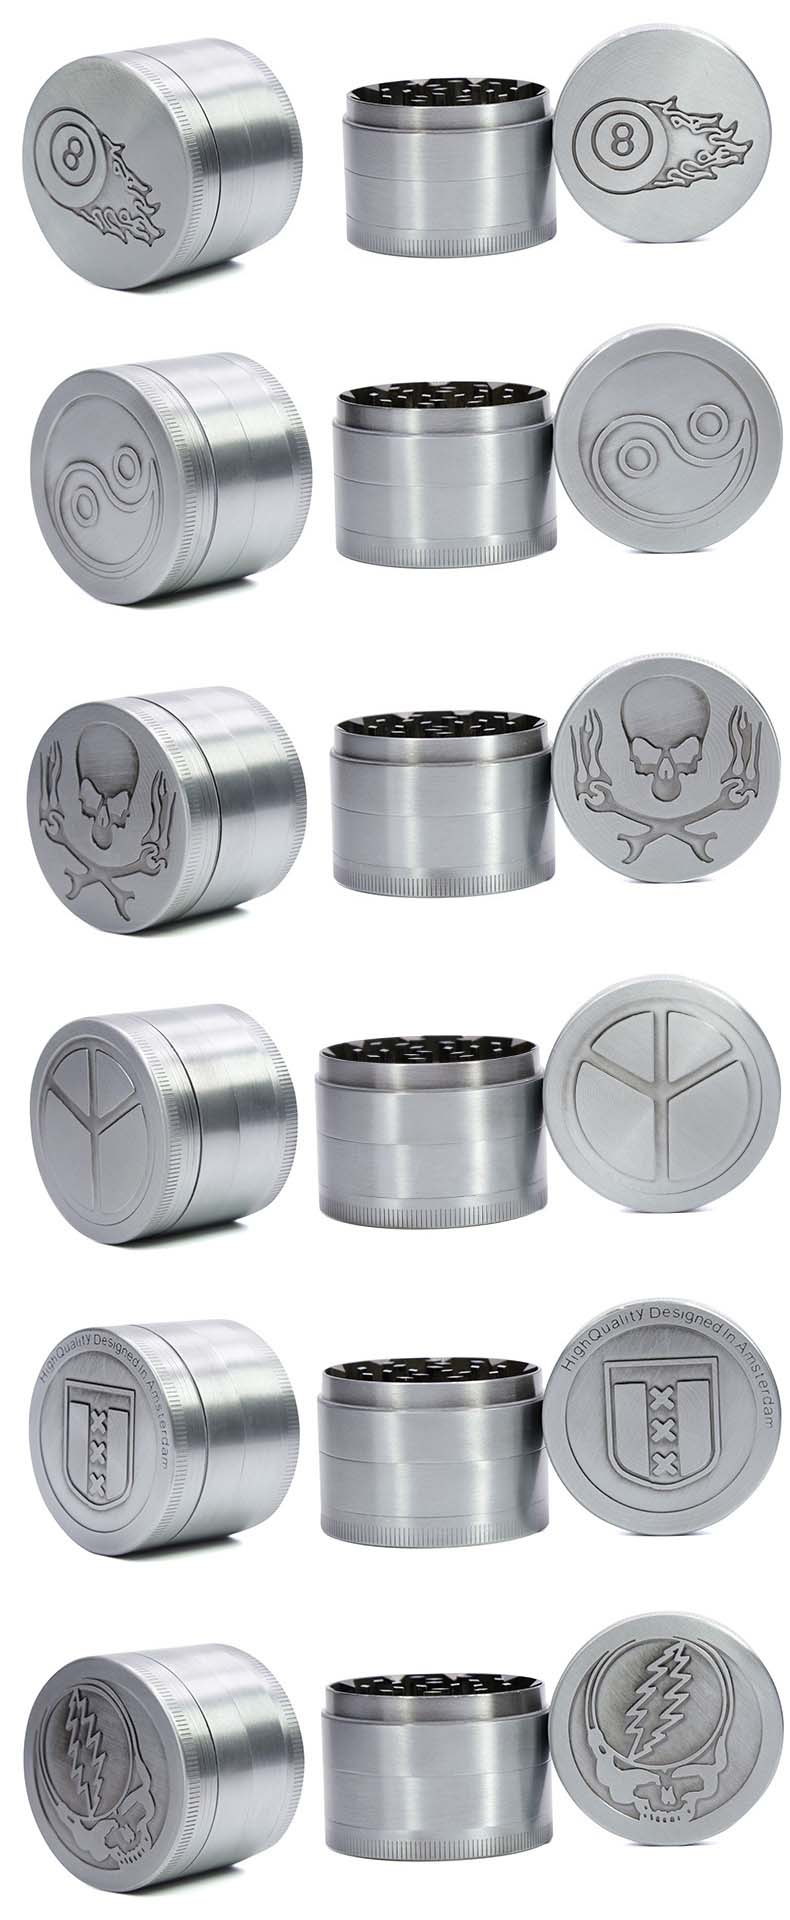 Wholesale Zinc Alloy Diameter 50mm Tobacco Grinder Weed with Low MOQ